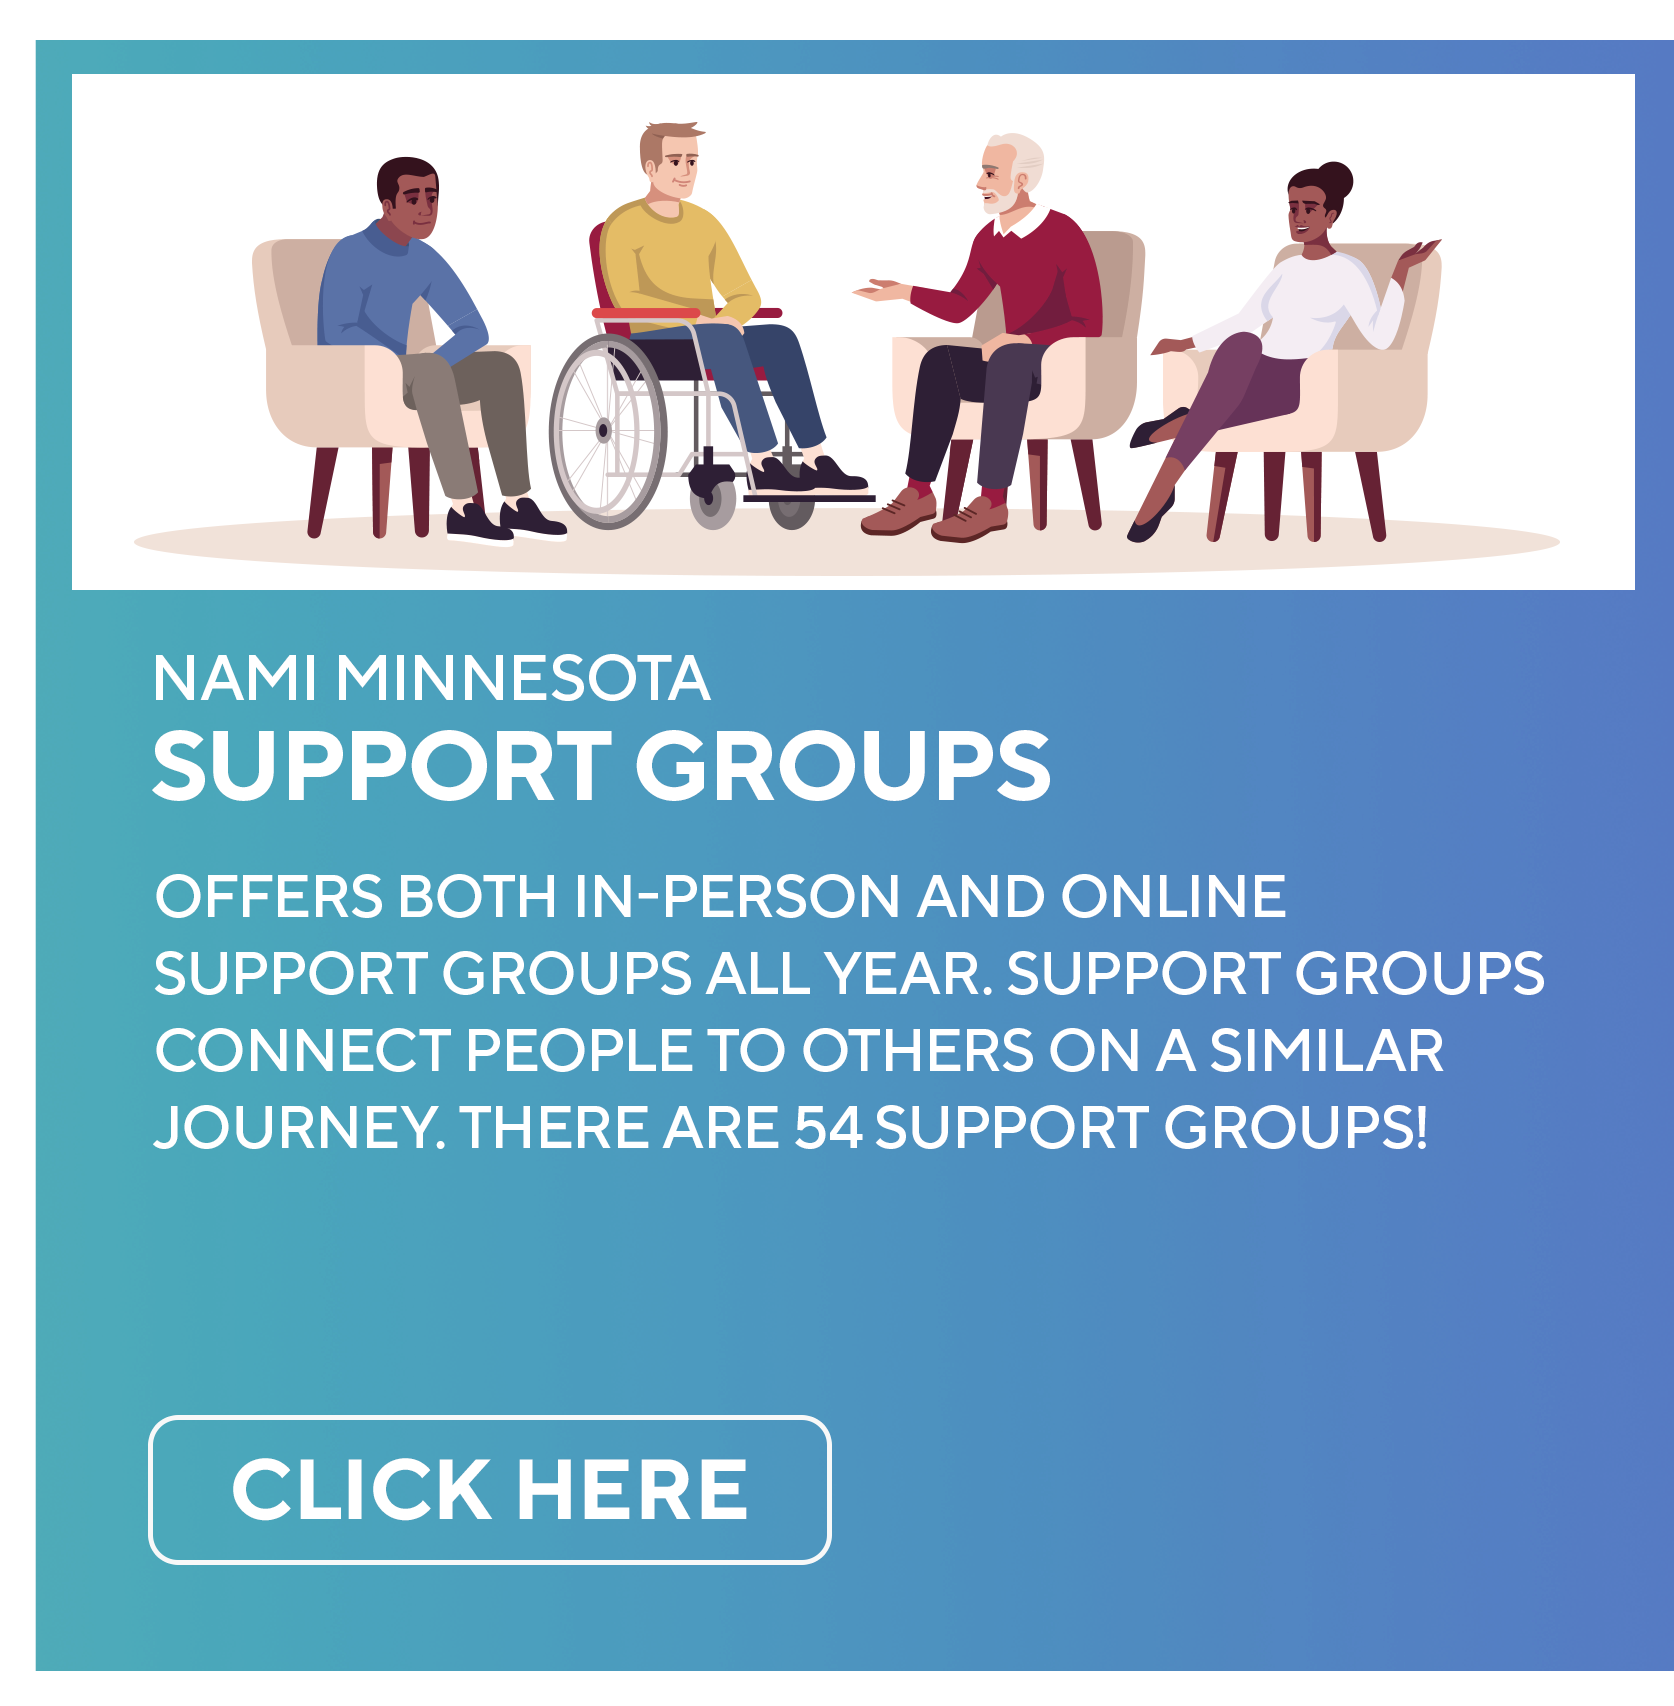 2-support-groups.png 